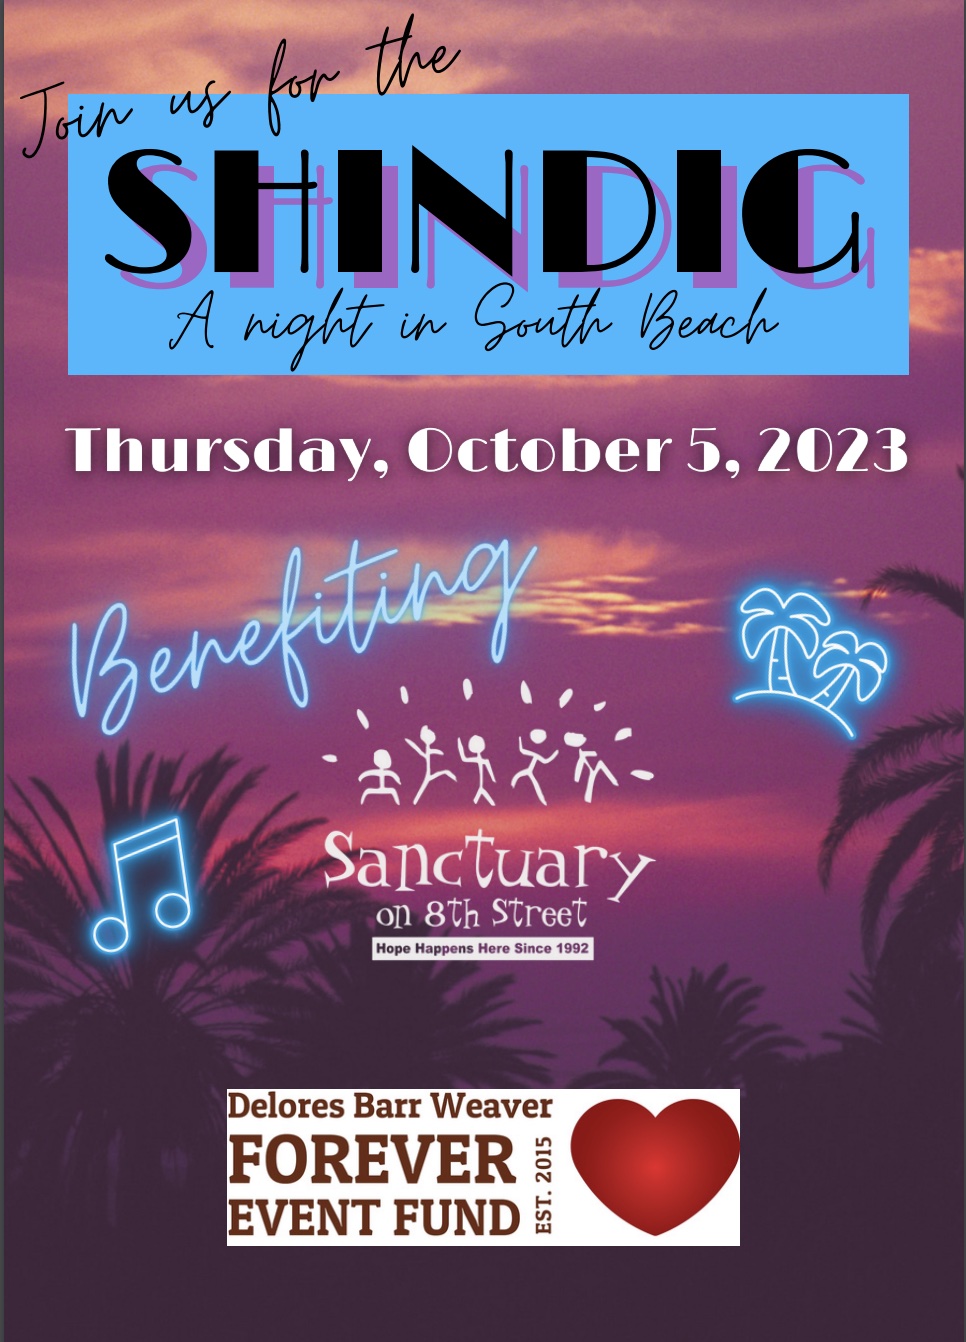 Join us for the Shindig 2023 on October 5.